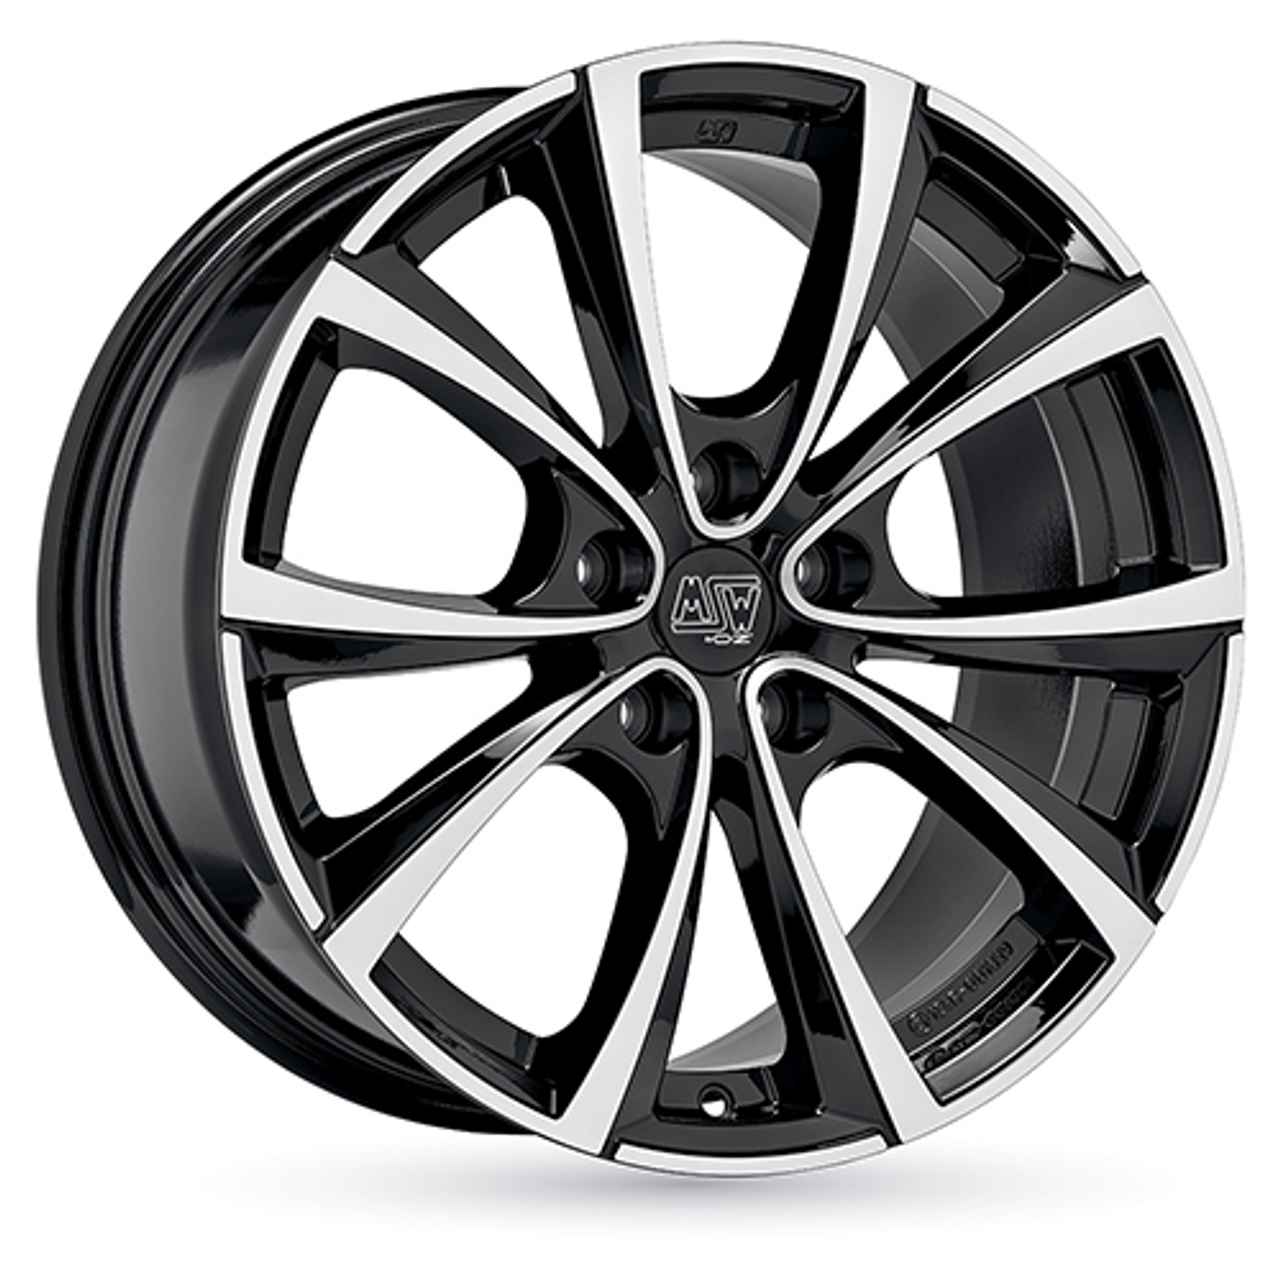 MSW (OZ) MSW 27T gloss black full polished 8.5Jx18 5x114.3 ET40